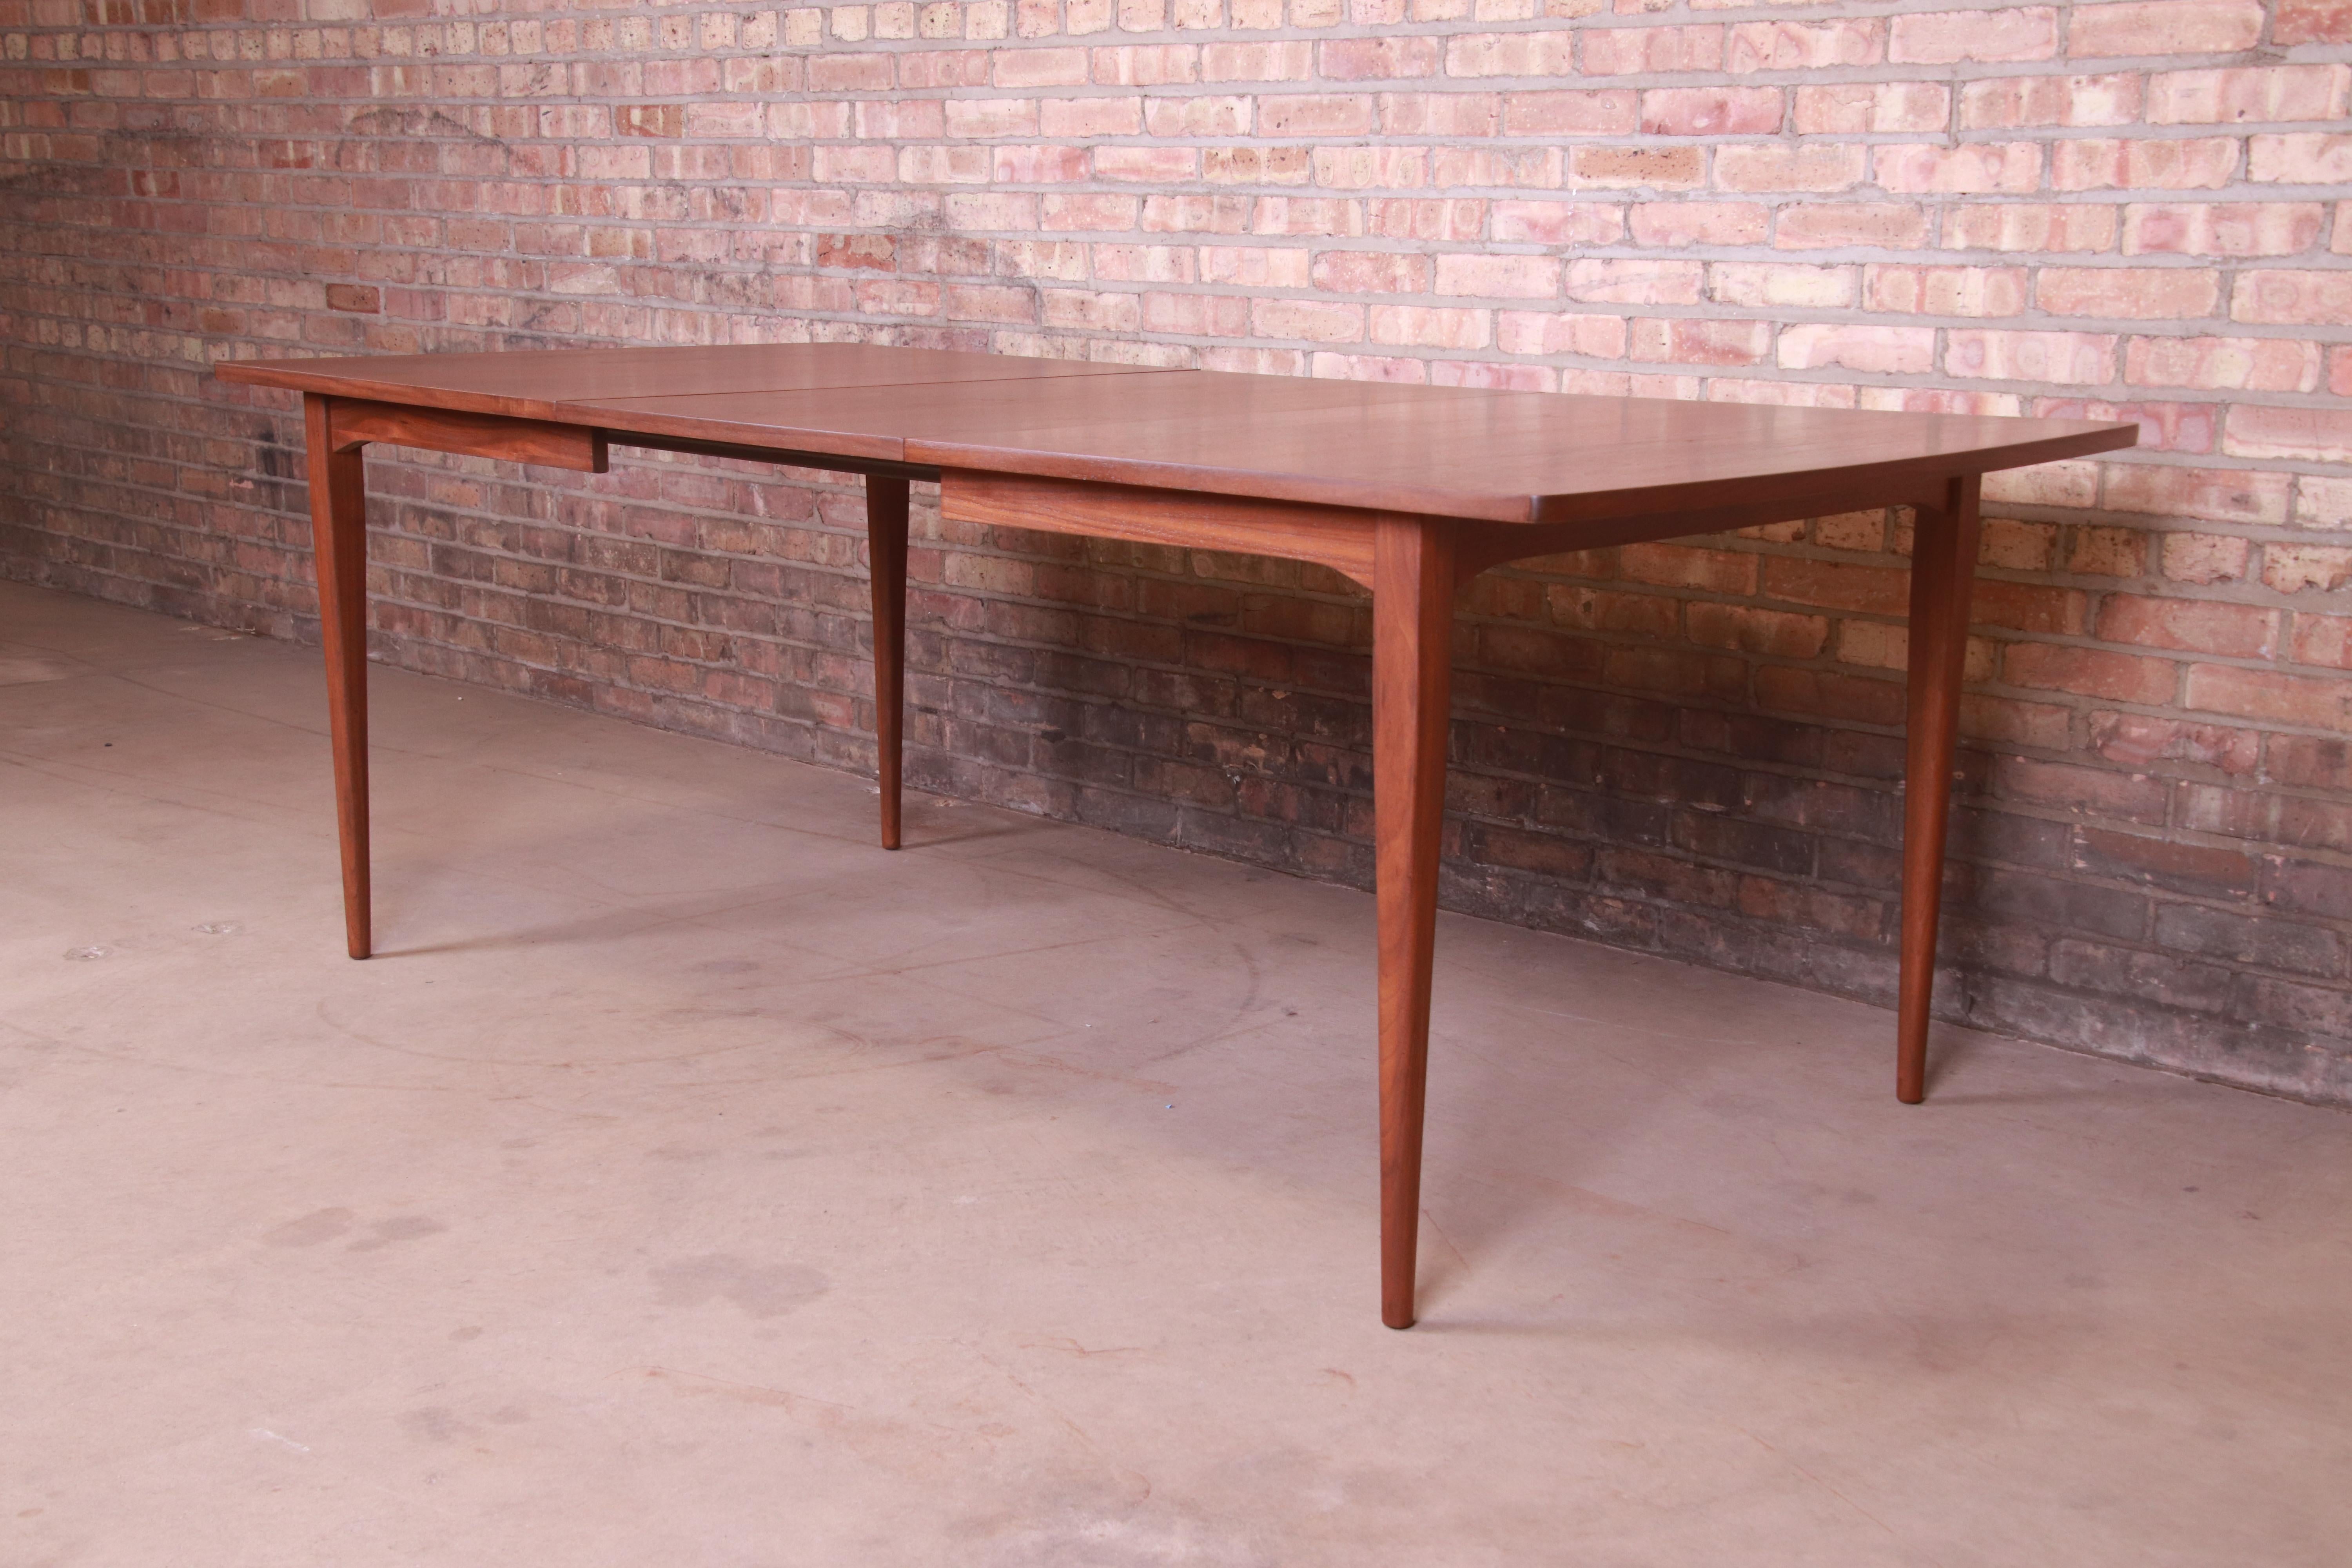 An exceptional Mid-Century Modern walnut extension dining table,

By Kipp Stewart for Drexel 